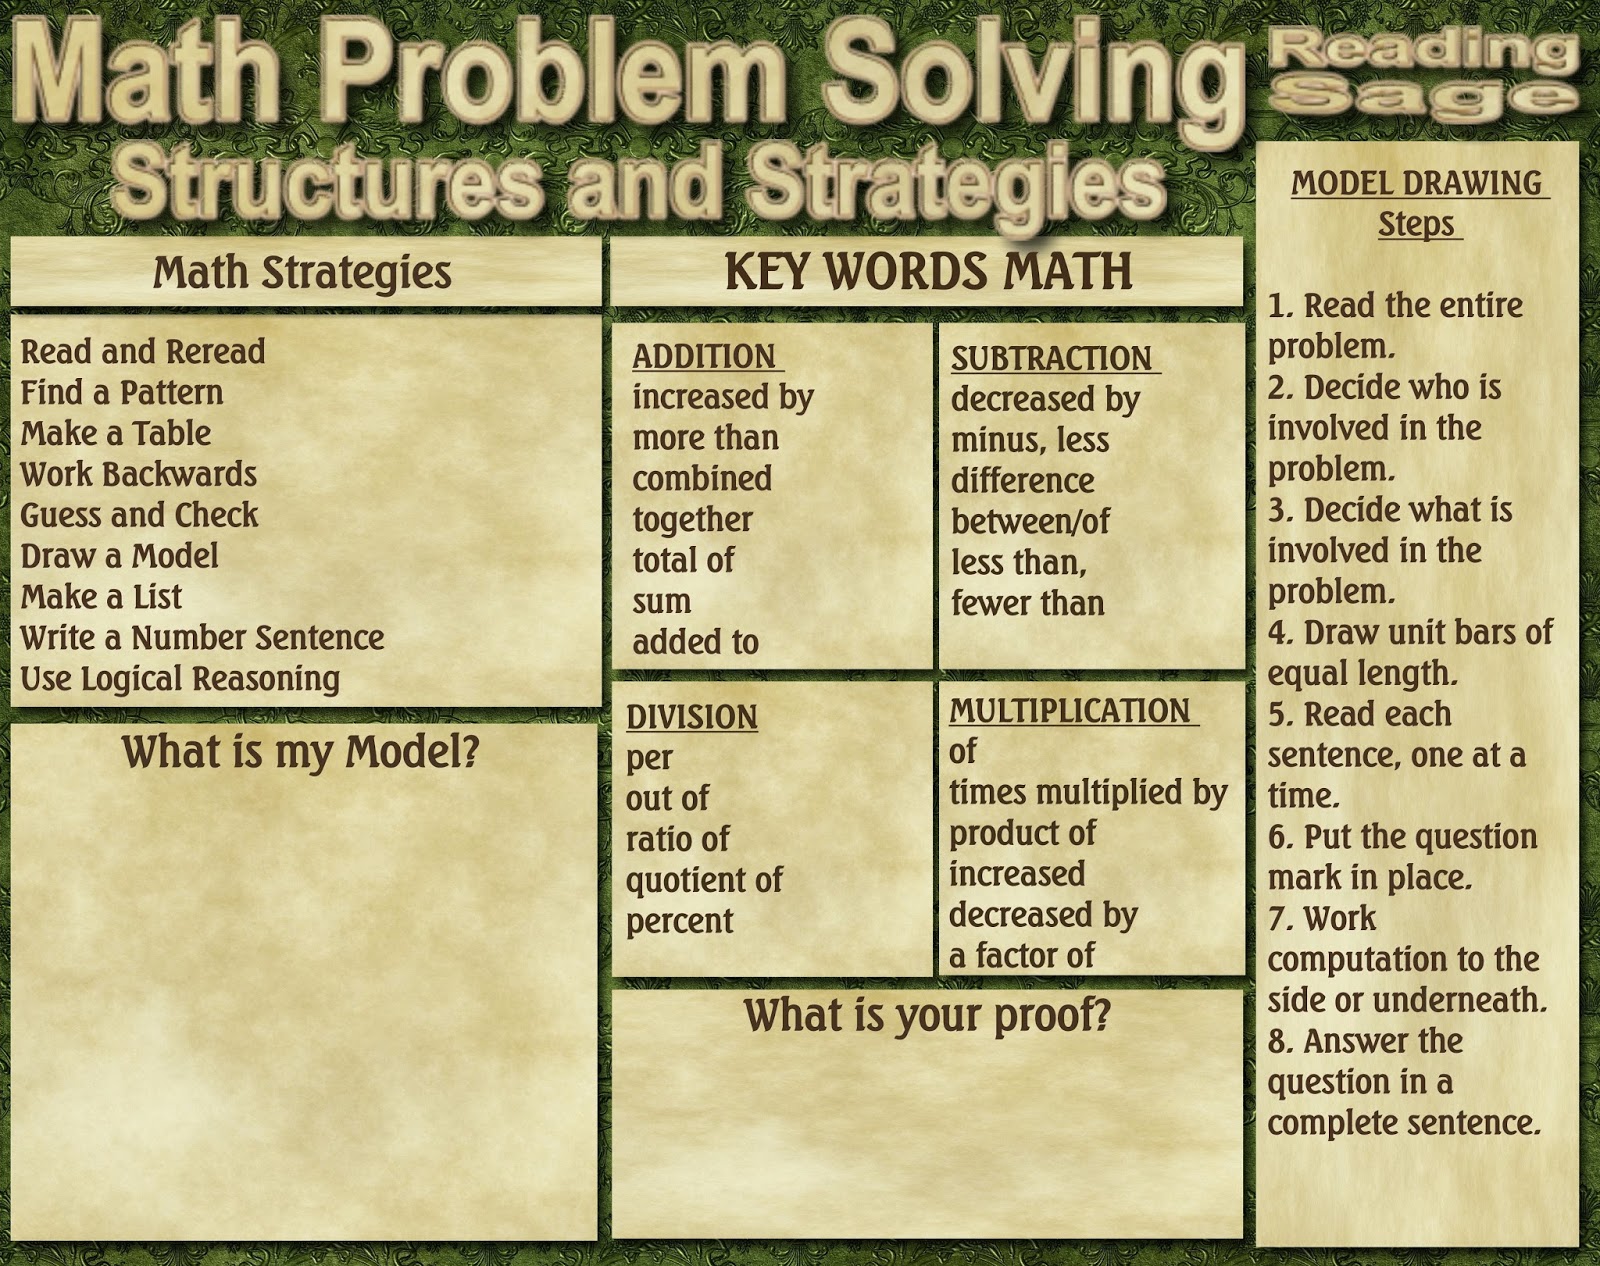 Strategies for critical thinking in math